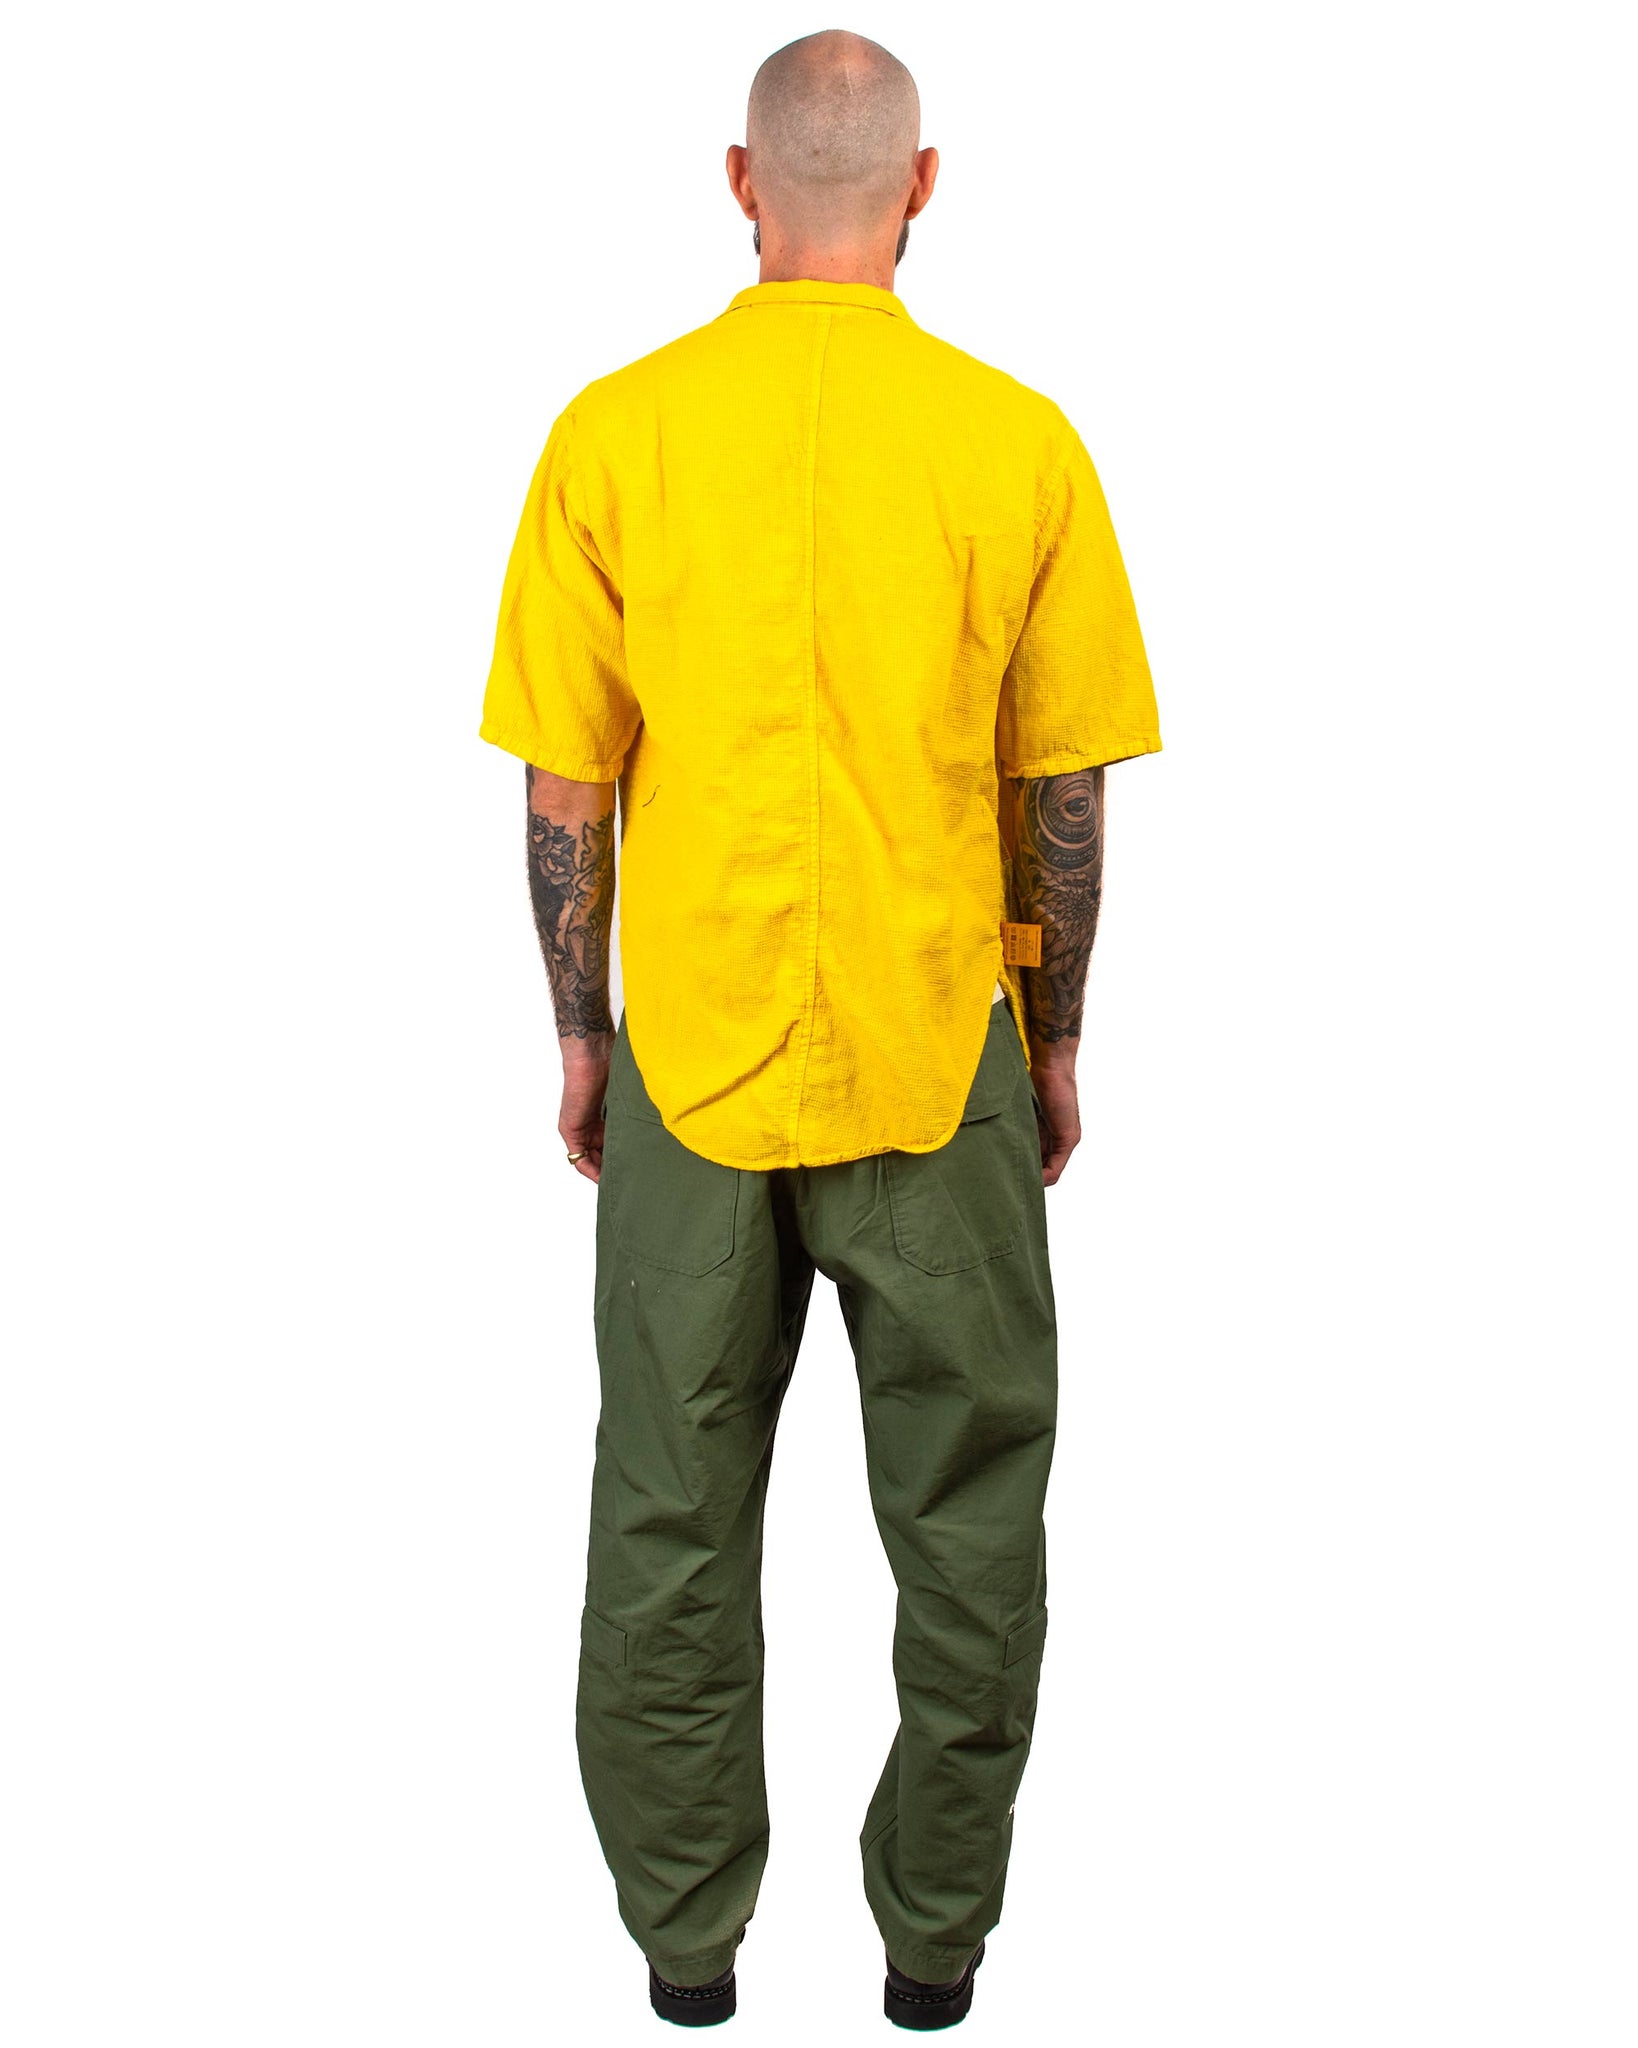 Tender Type 443 Short Sleeve Compass Pocket Shirt Fine Cotton Beekeeper's Cloth Tumeric Dyed Back